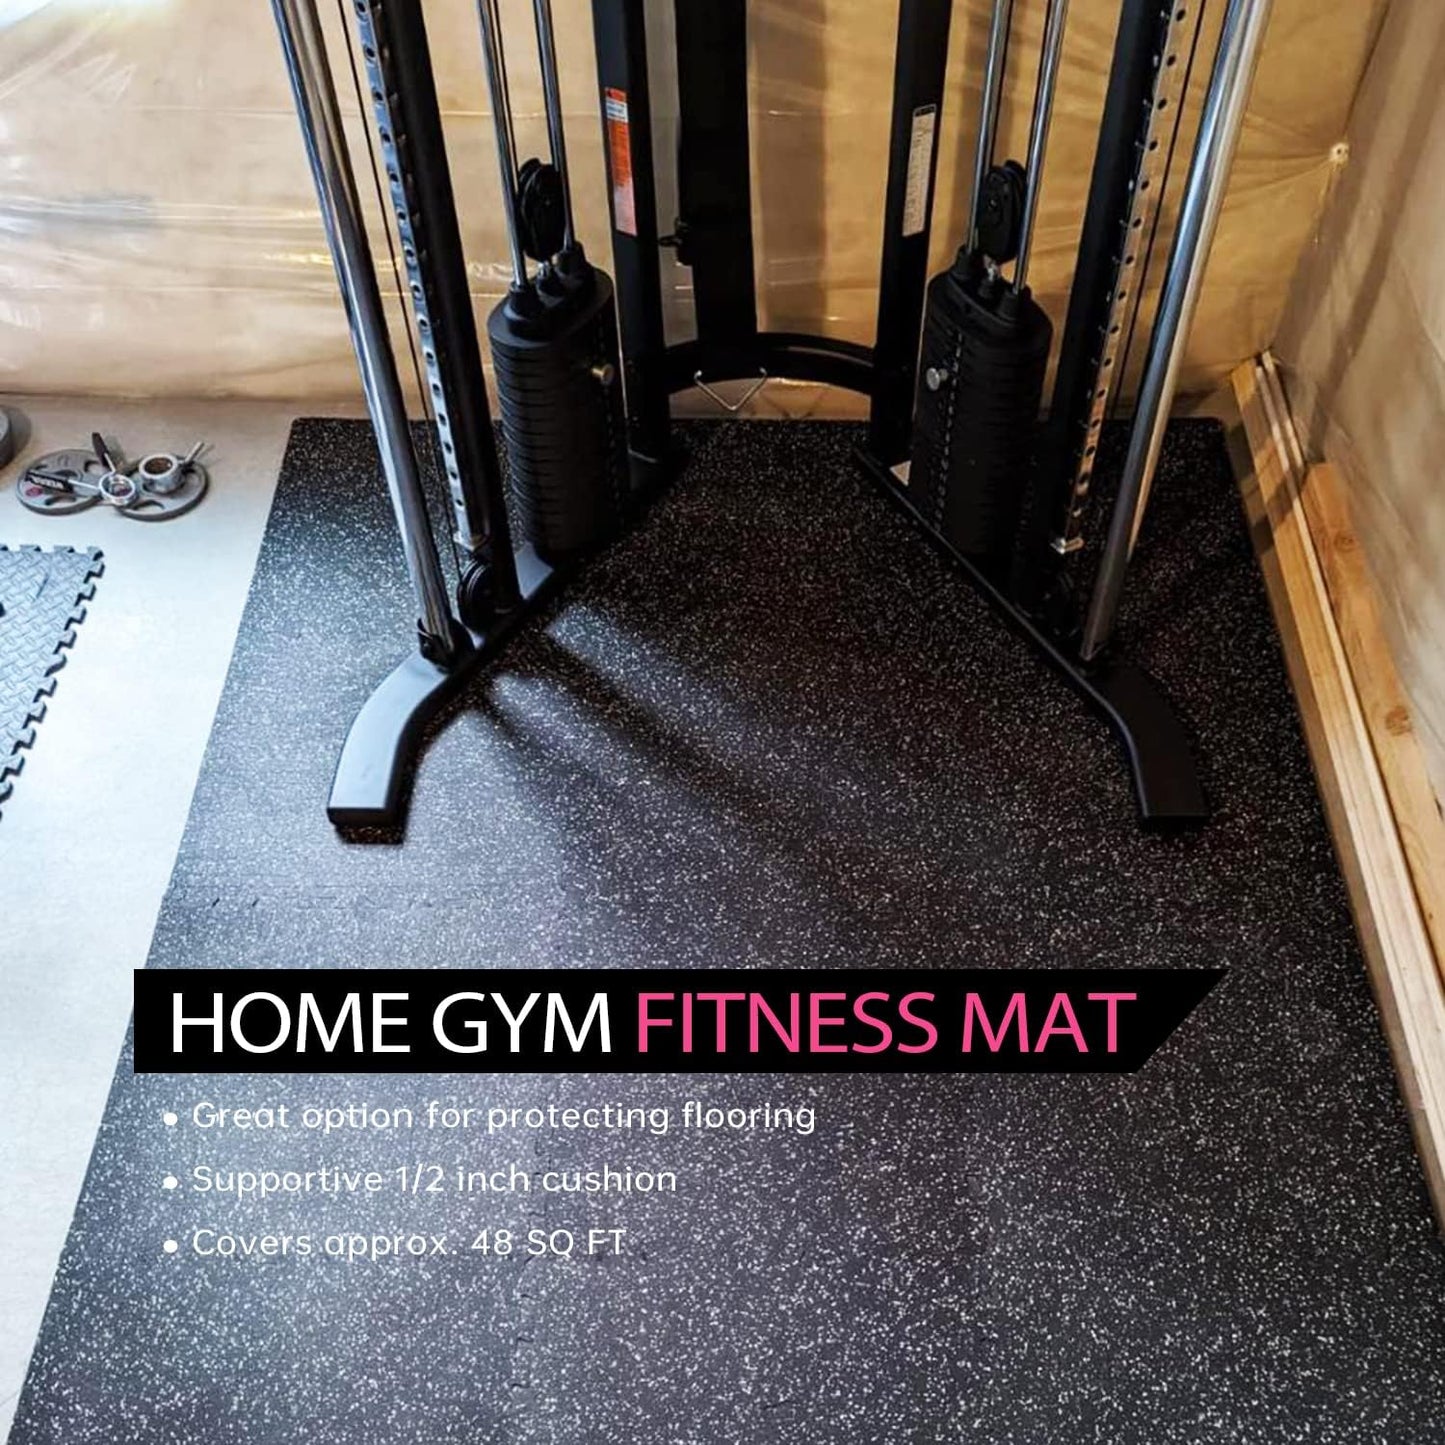 0.56 Inch Thick Gym Flooring for Home Gym with Rubber Top - 48 Sq Ft Interlocking Gym Floor Tiles - Workout Equipment Vibration Reduction Mats - 12 Pcs 24 X 24In Tile, Black & Pink